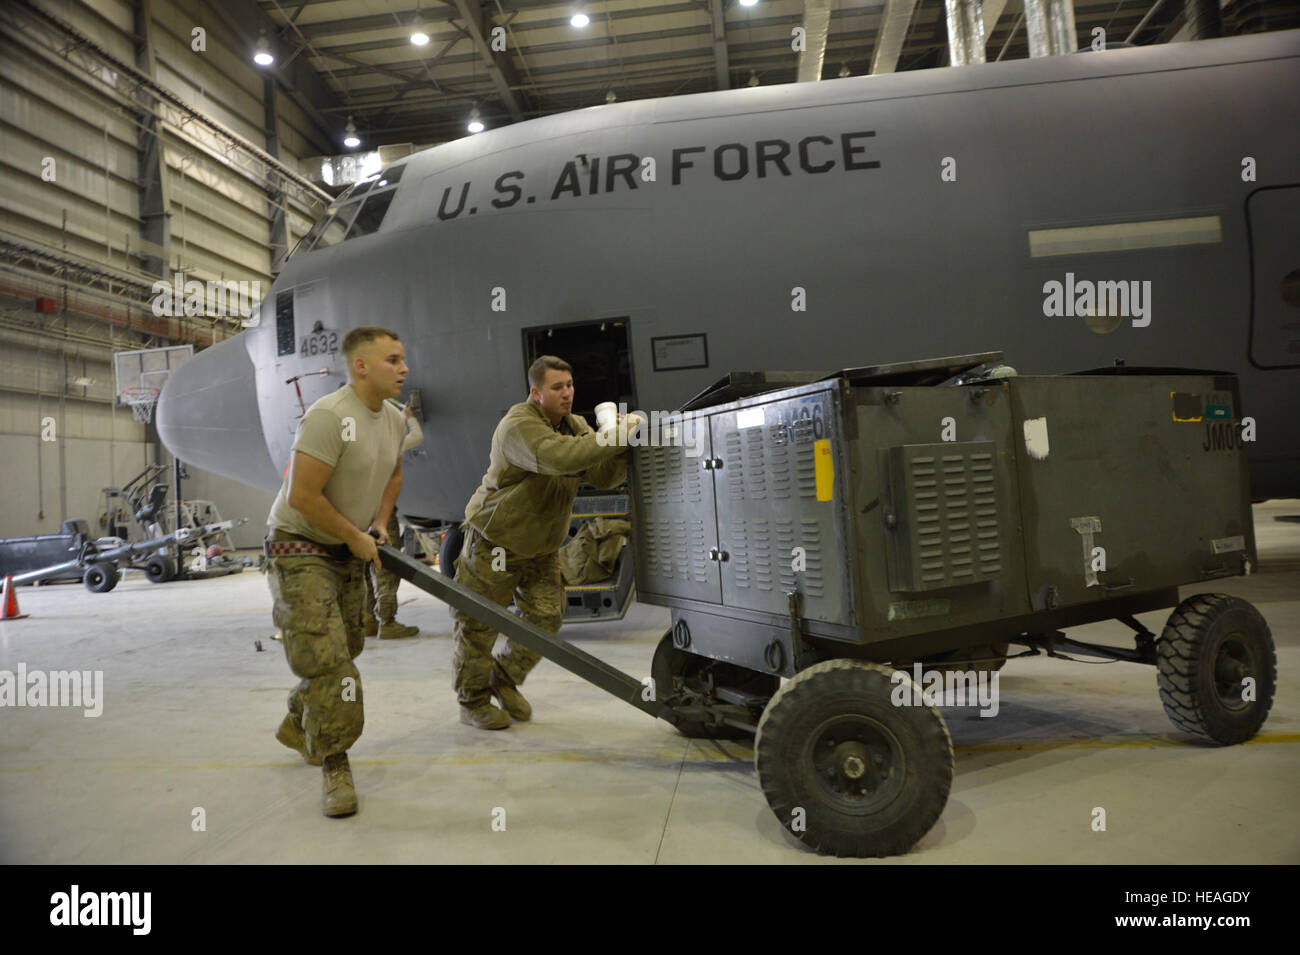 U.S. Air Force Senior Airman Charles Livesoy and Staff Sgt. Ian Farley a generator that will be used in conjunction with jacks to raise a C-130J Super Hercules Nov. 3, 2014.